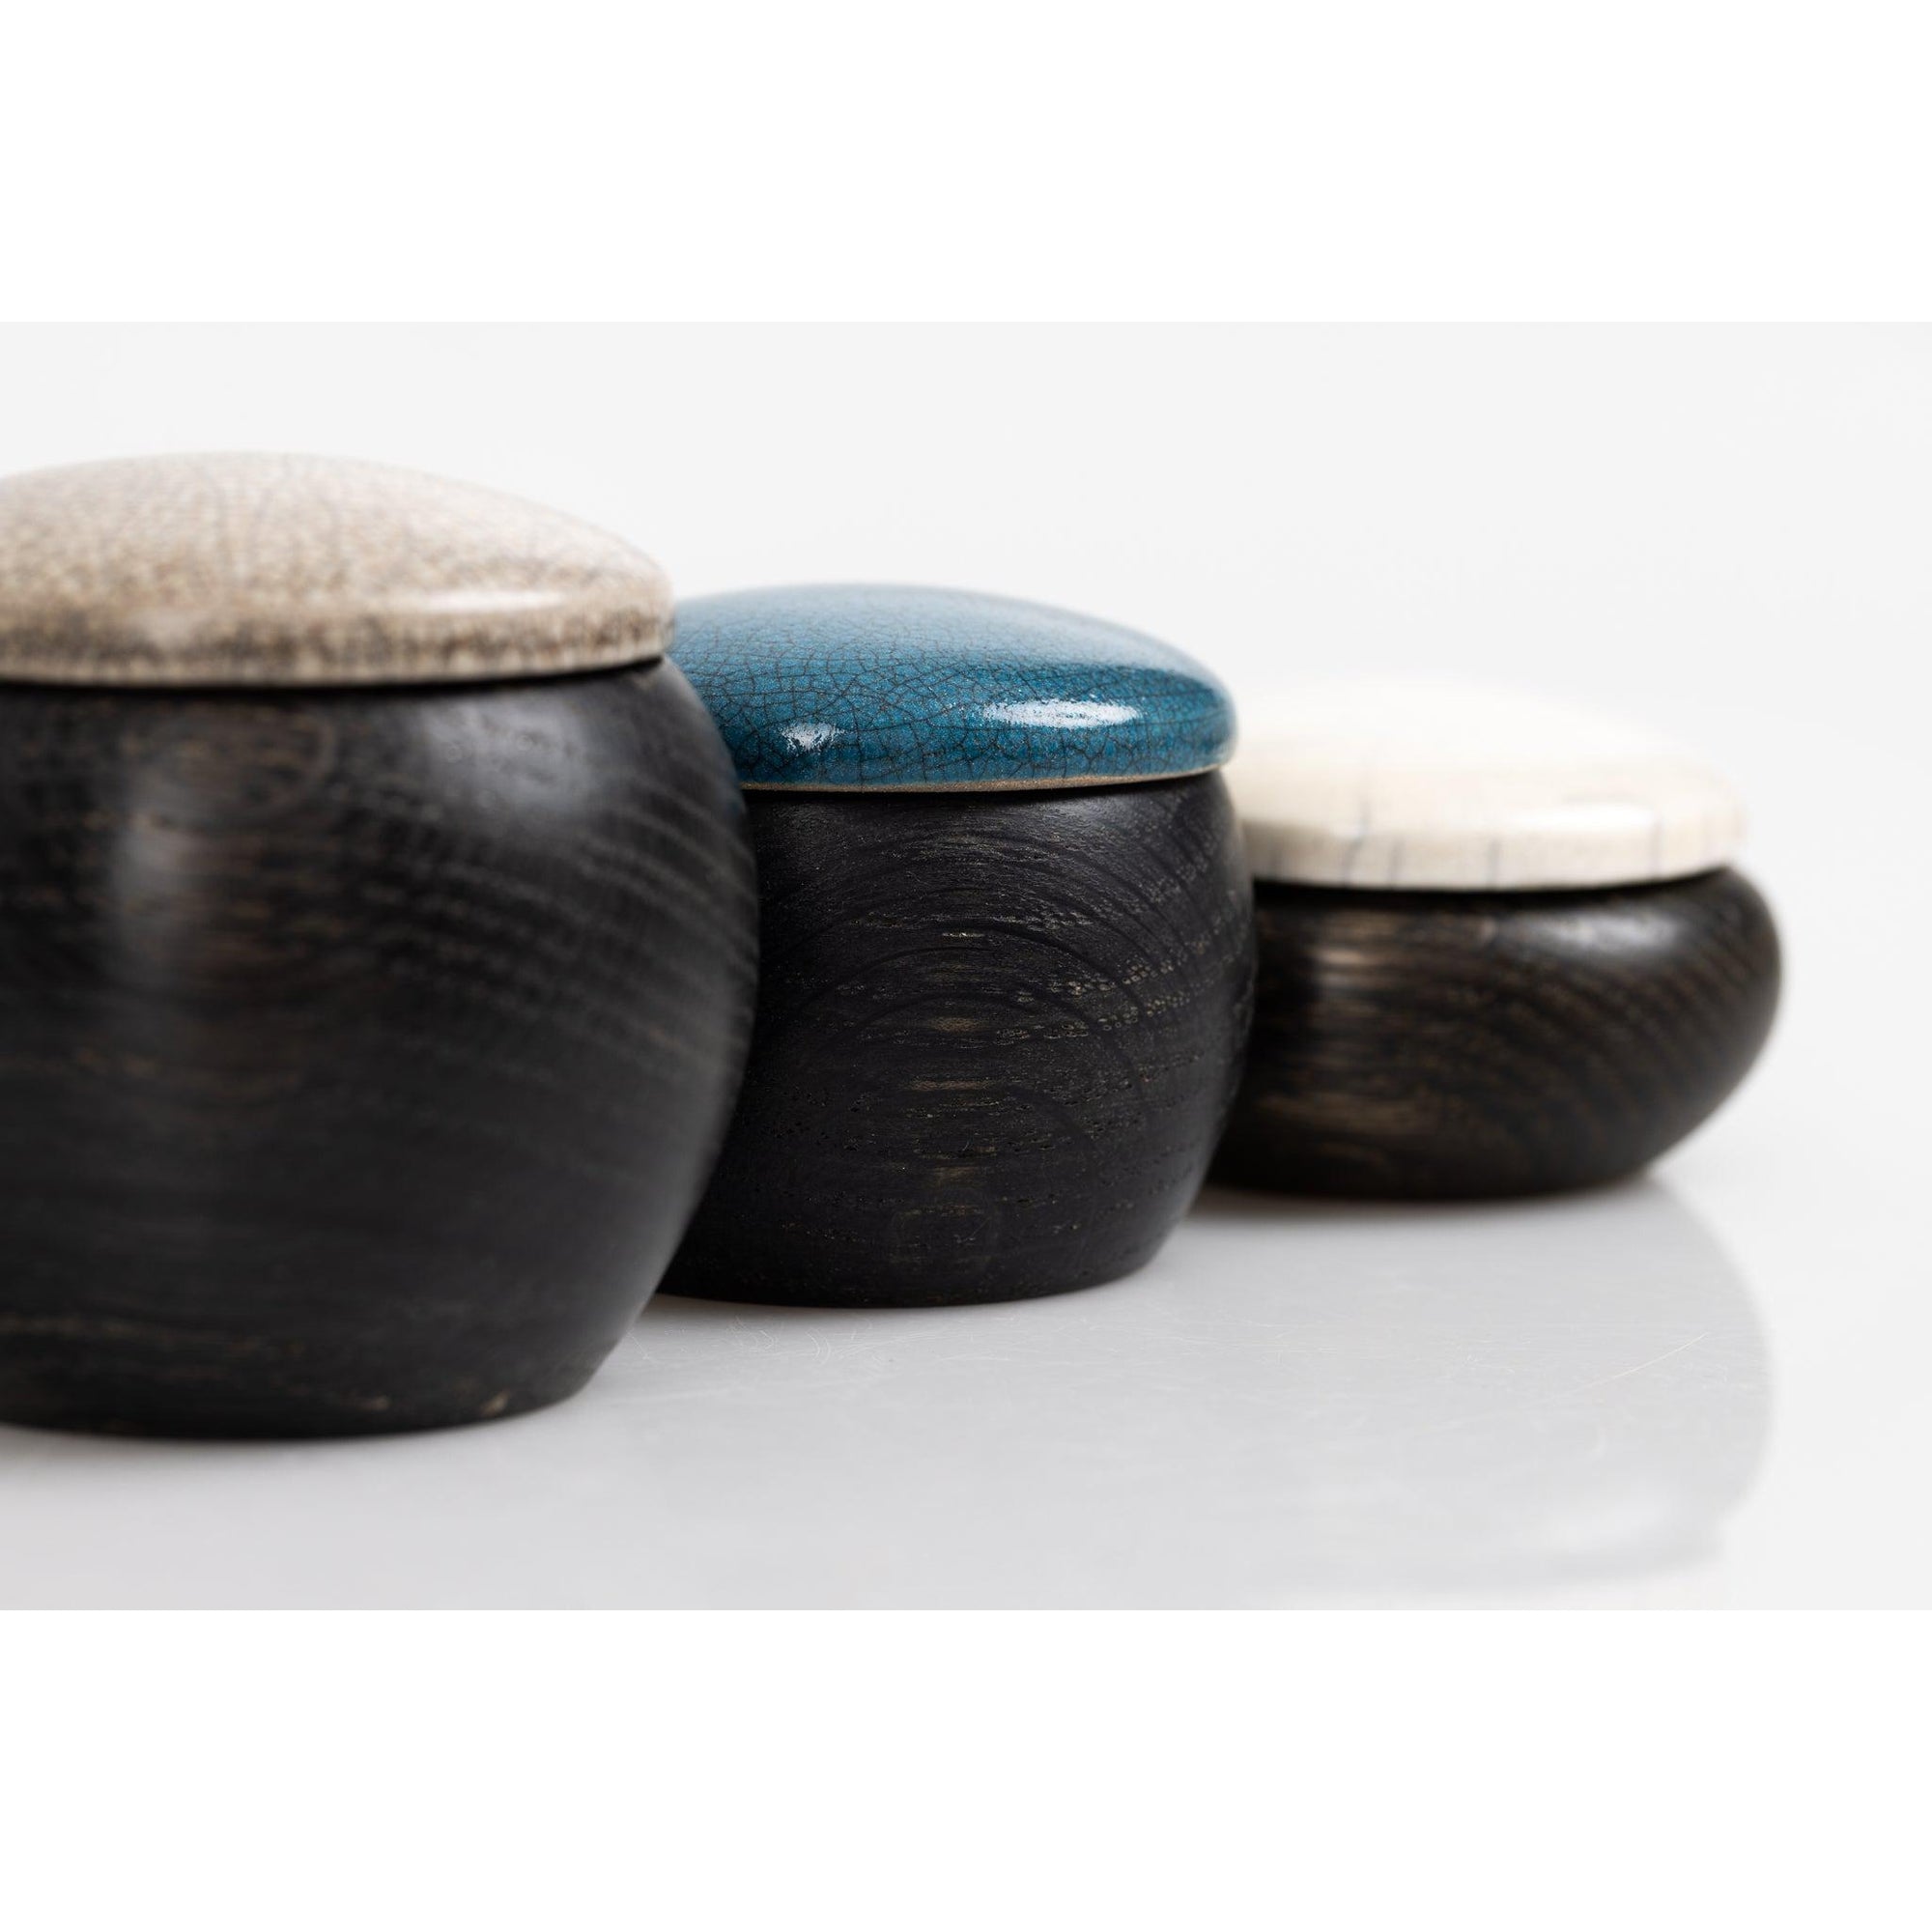 KSCC3 Ebonised Wave Pot by Kate Schuricht, available at Padstow Gallery, Cornwall